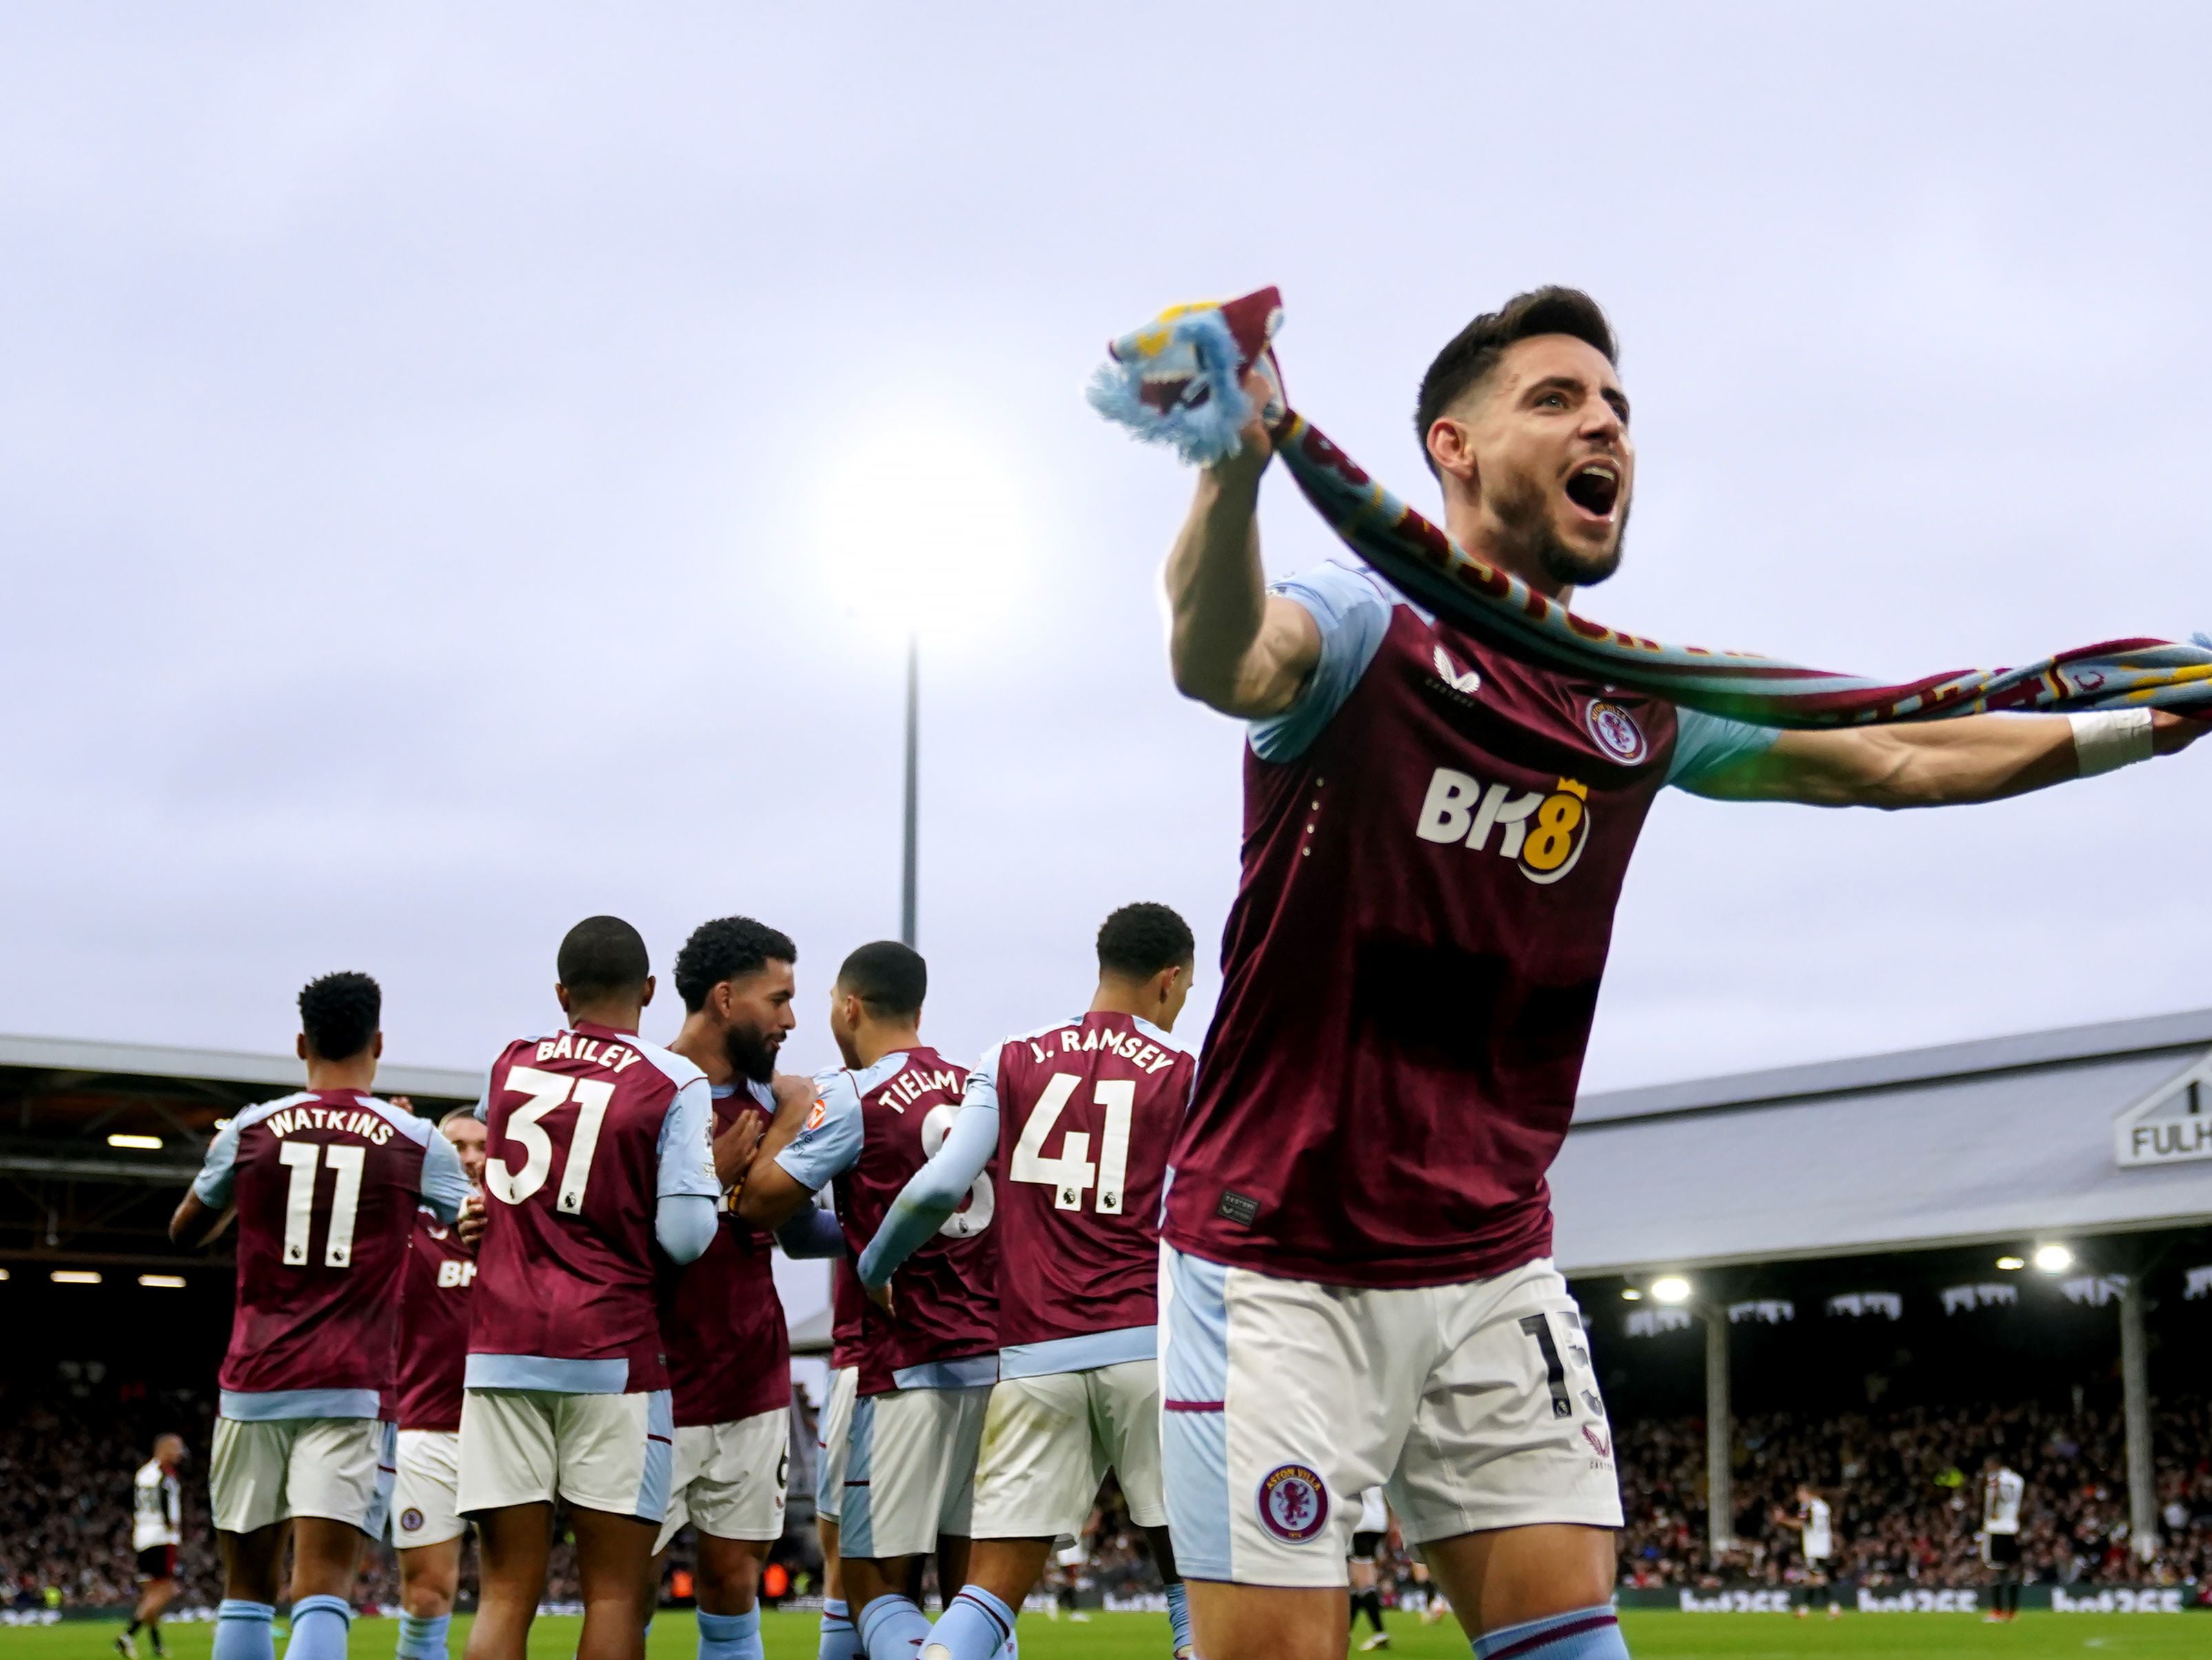 Aston Villa may need to cheer rivals in race for Champions League